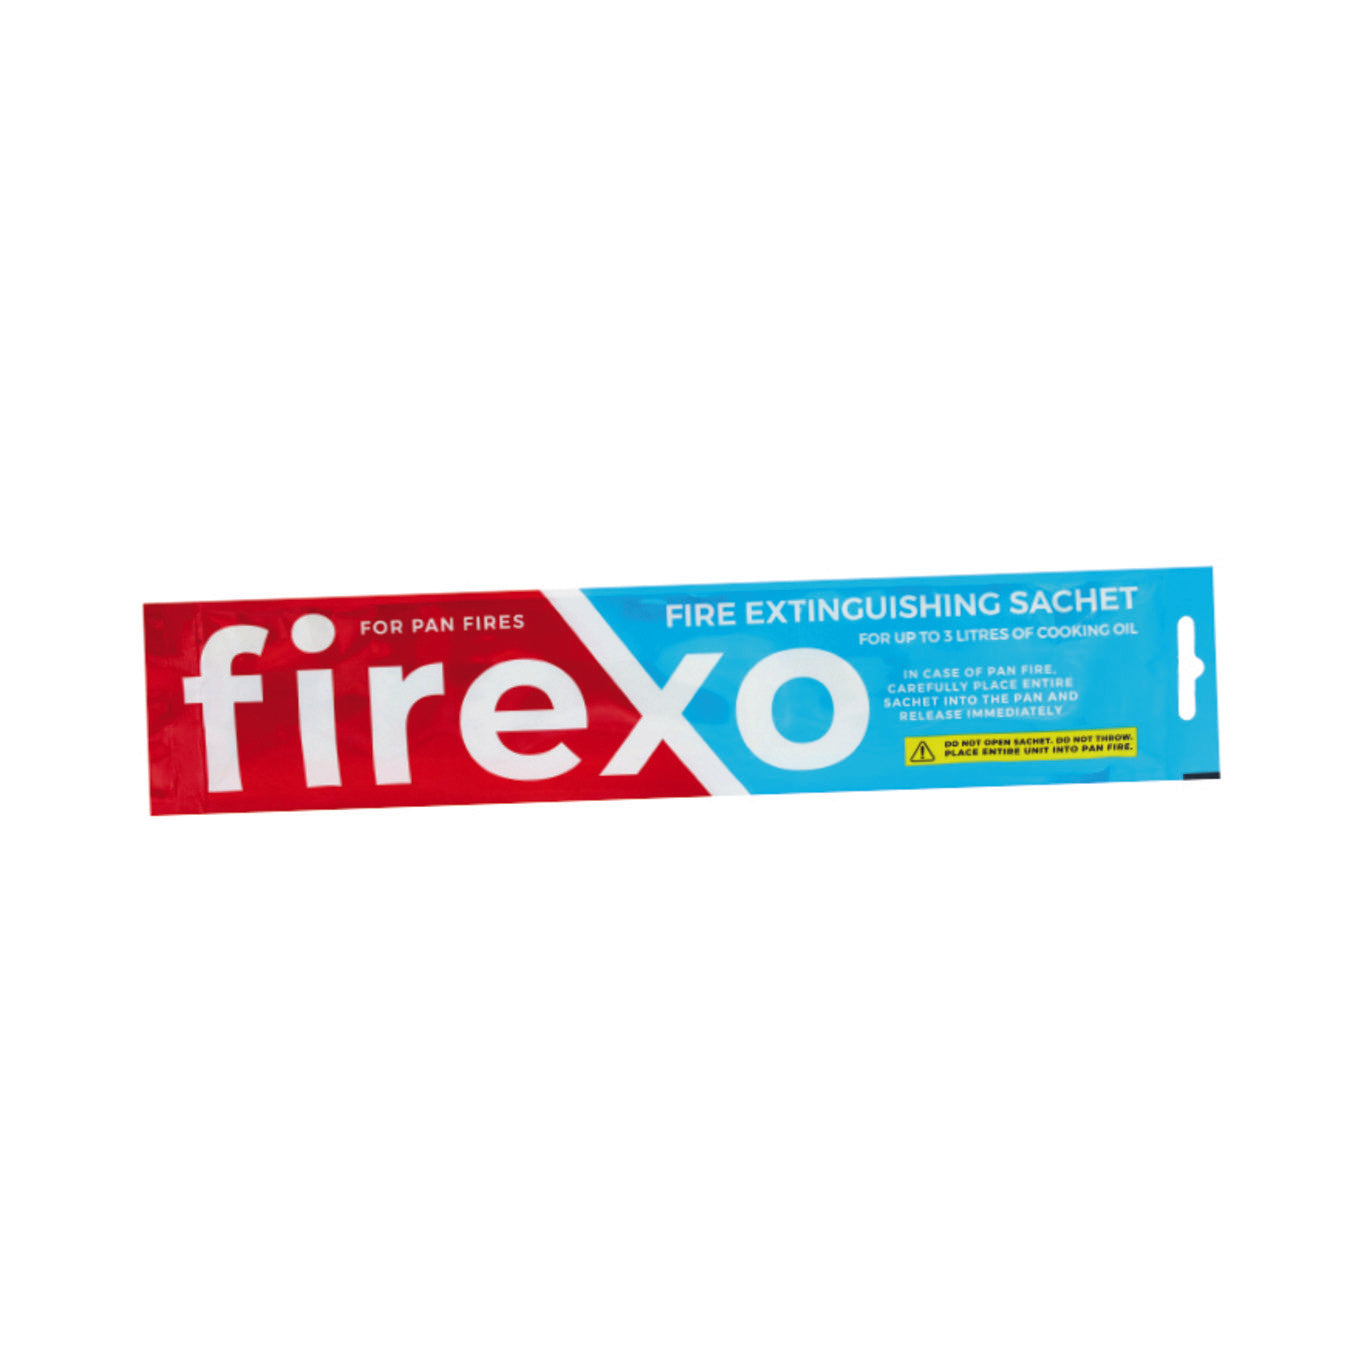 Pack of 3 - Firexo Pan Fire Extinguisher Sachet, fire blanket alternative, for all oil and fat pan fires kitchen, BBQ, camping, fire extinguisher.